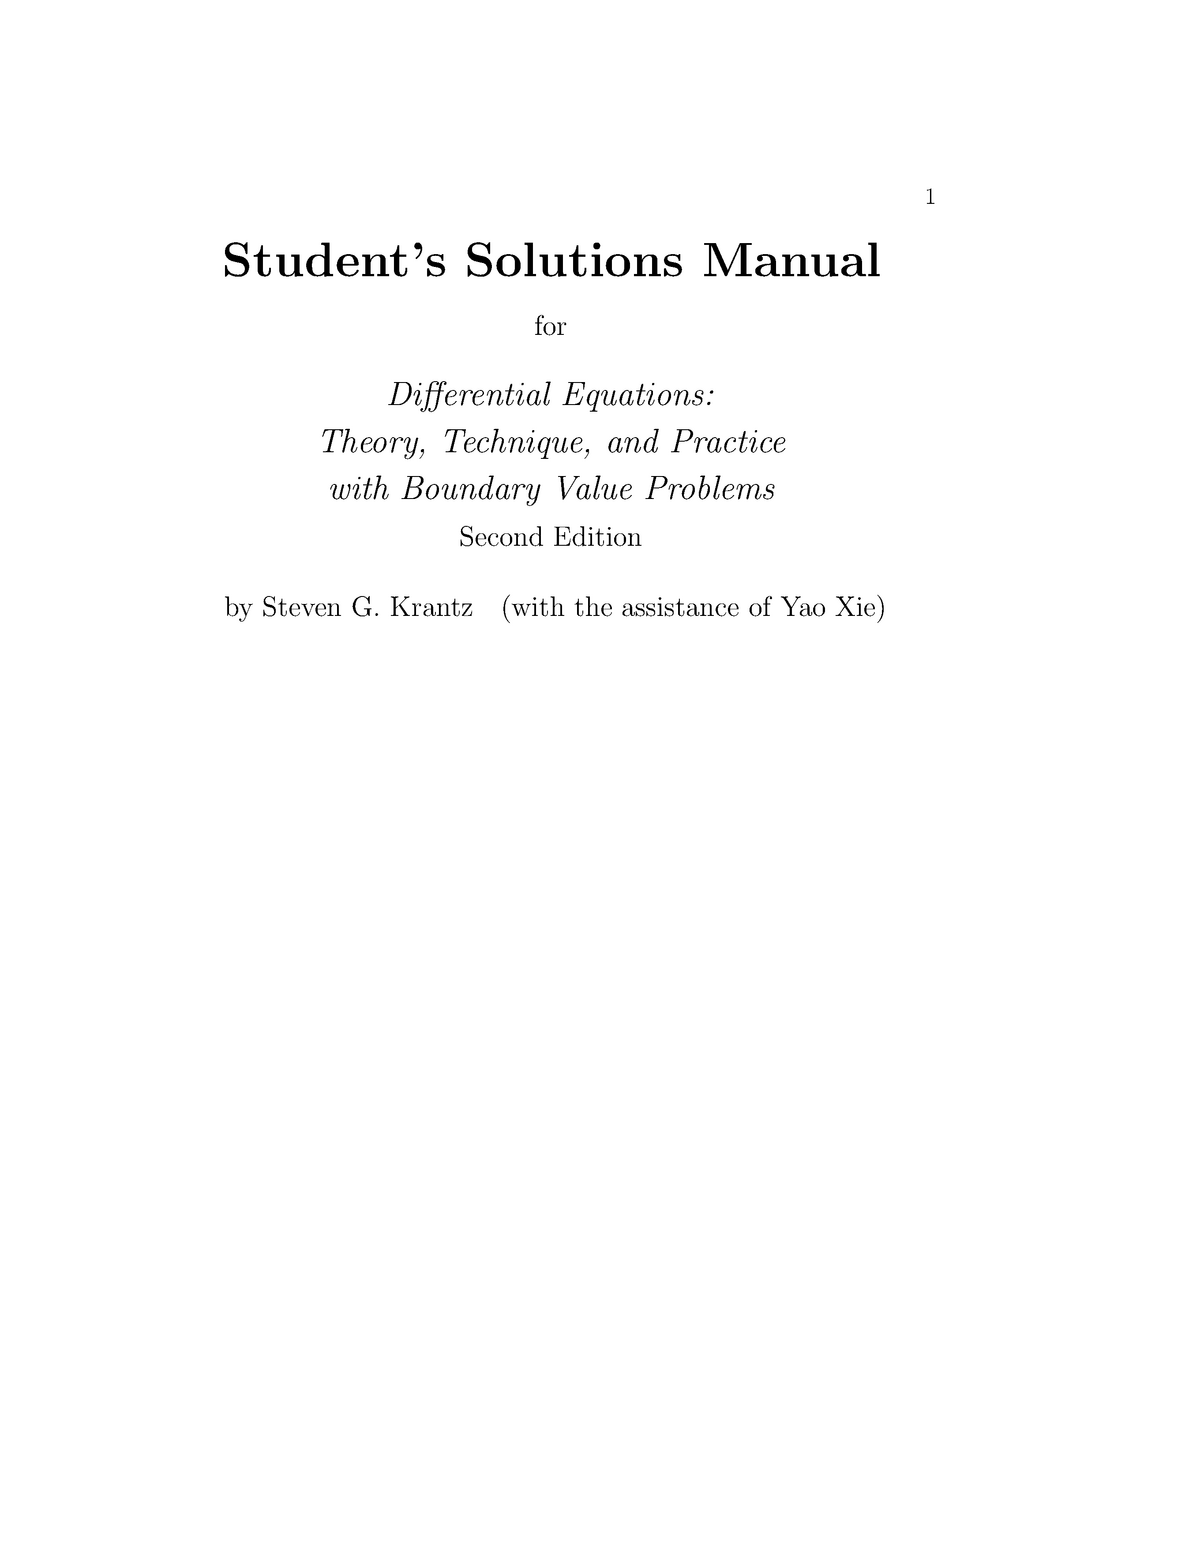 download g f simmons differential equations pdf download